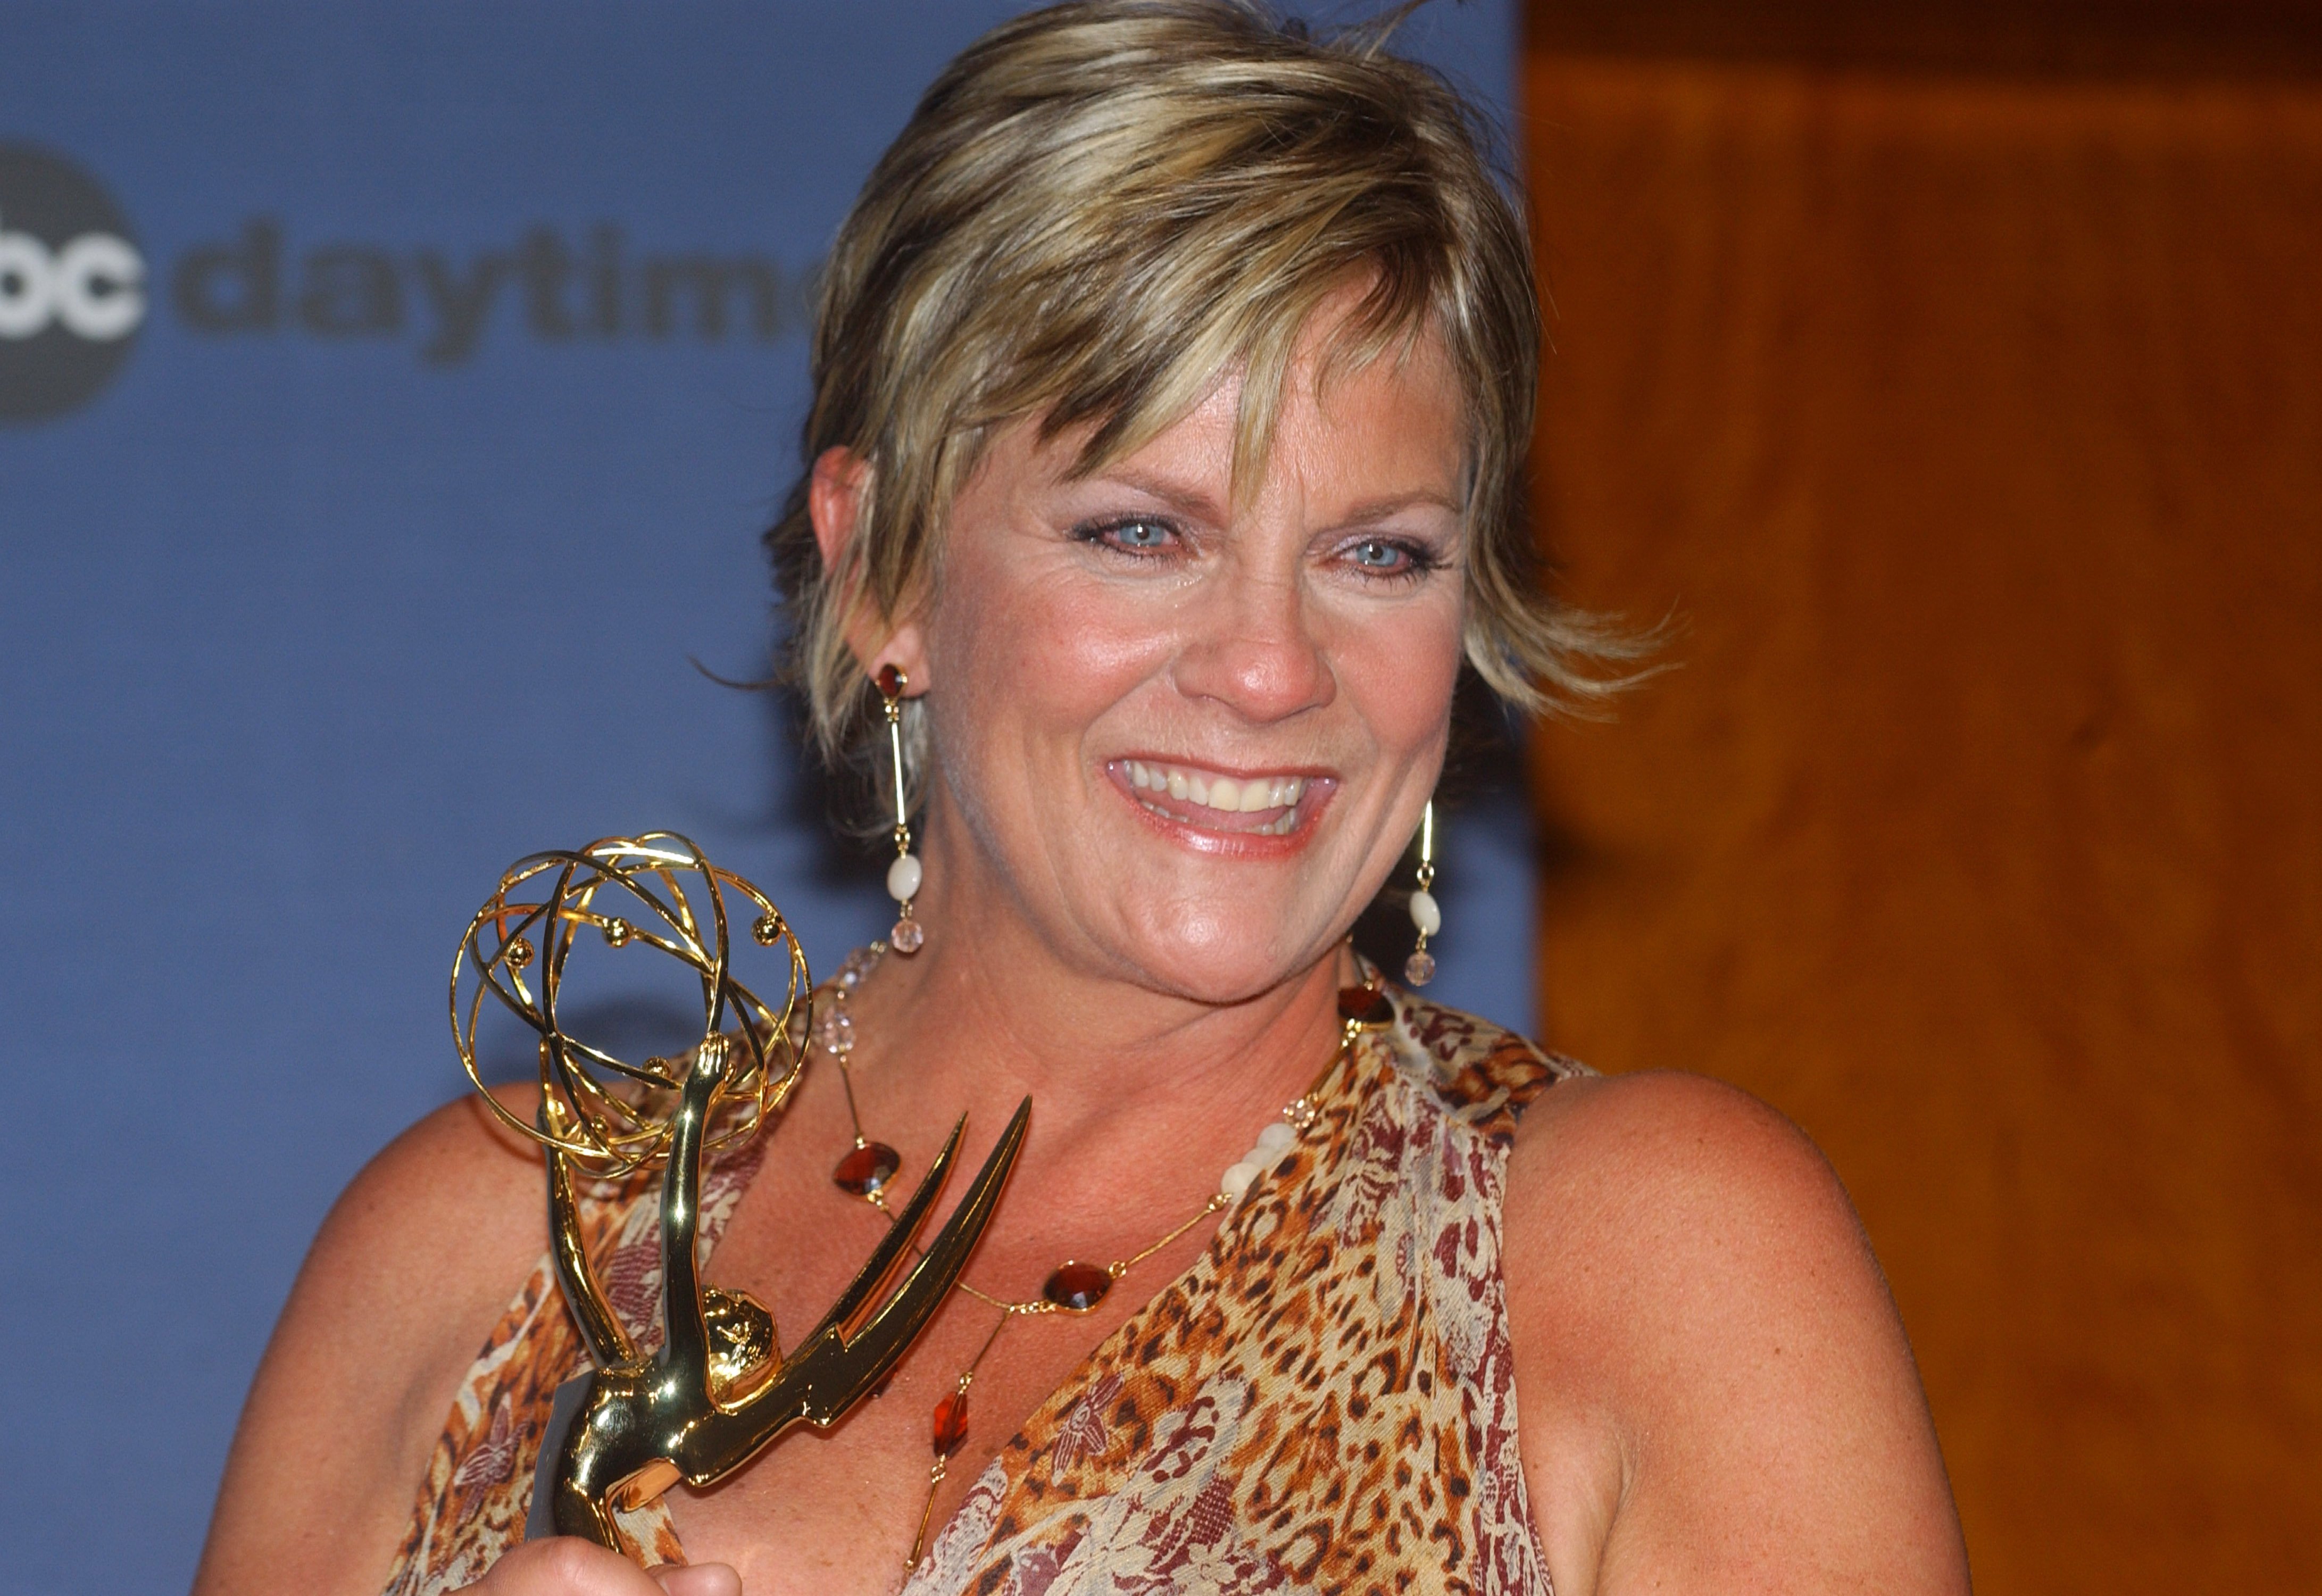 'Guiding Light' actor Kim Zimmer wearing a leopard print dress and holding a Daytime Emmy.